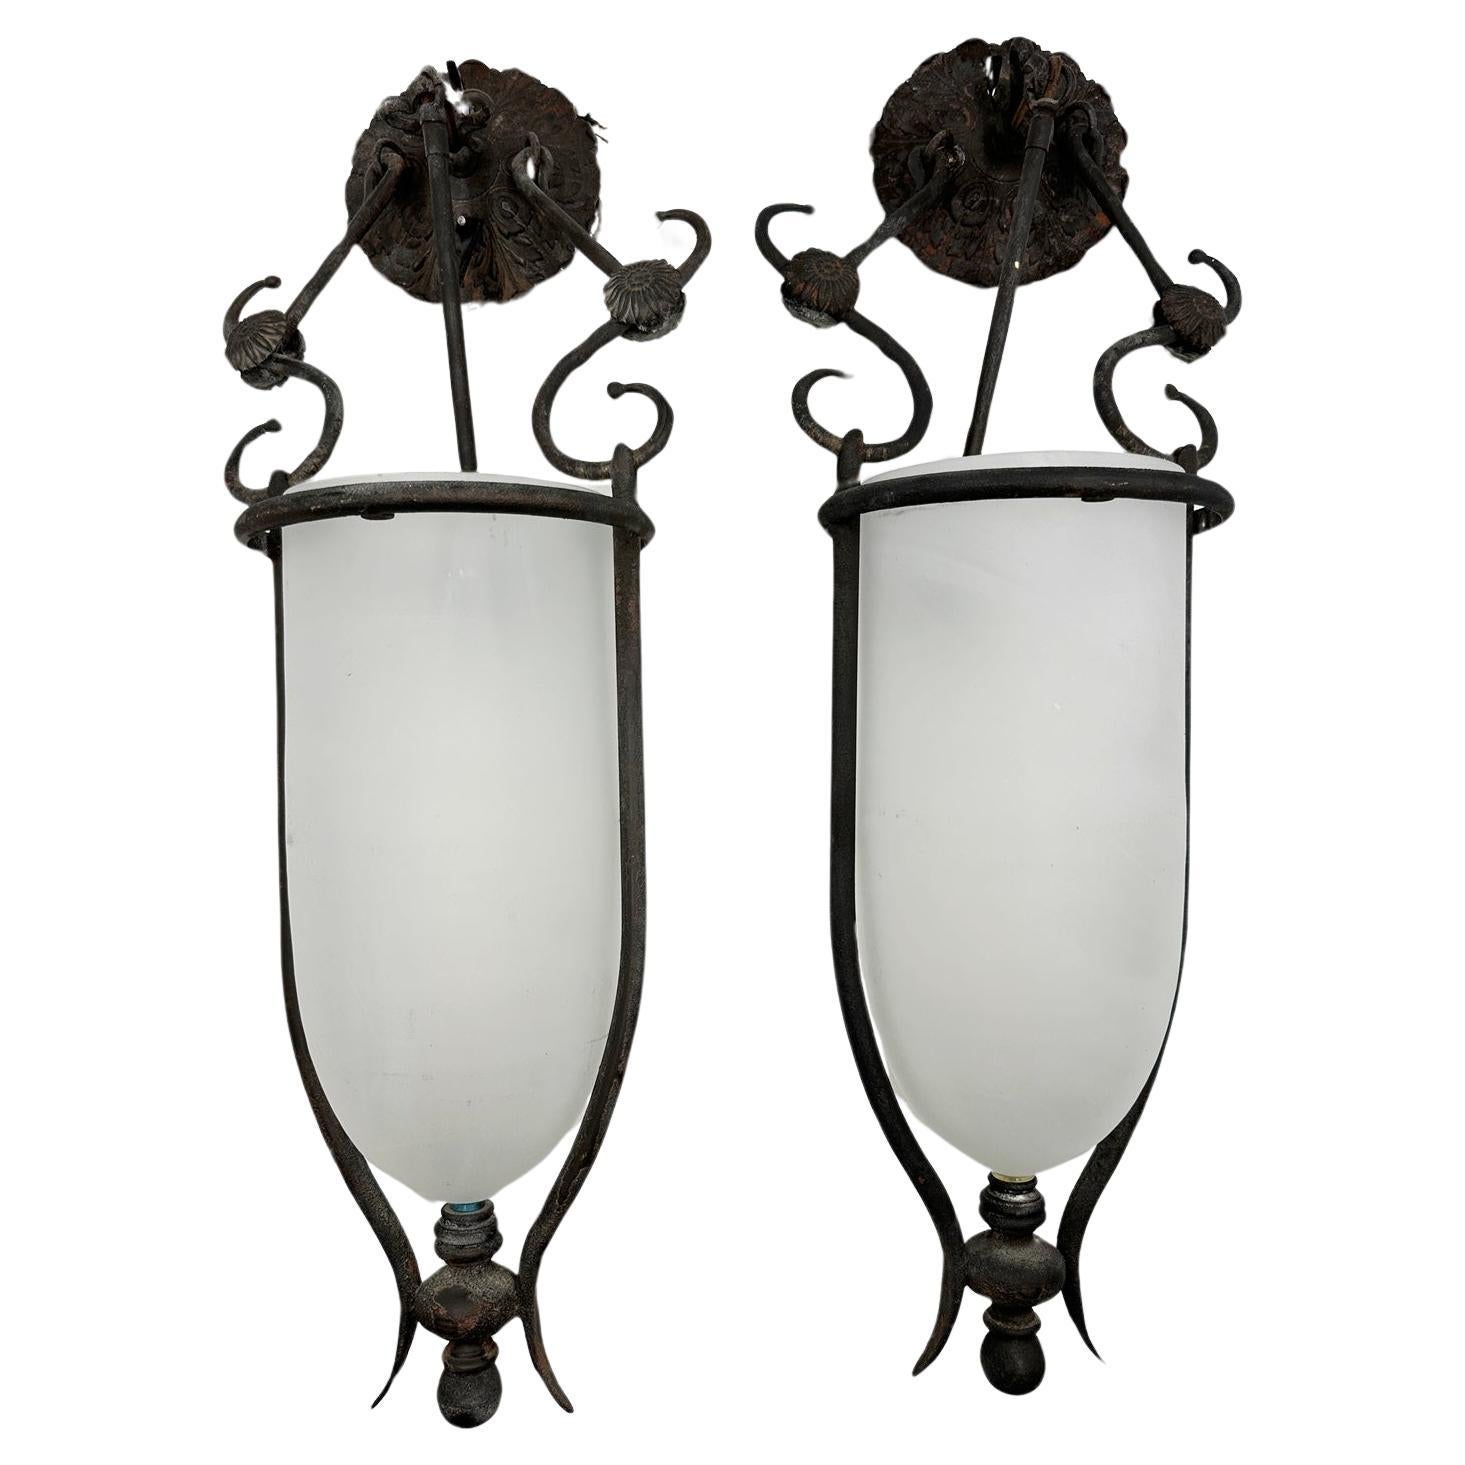 Pair of Glass & Steel Lantern Lights by Lantern Masters, USA 2000's For Sale